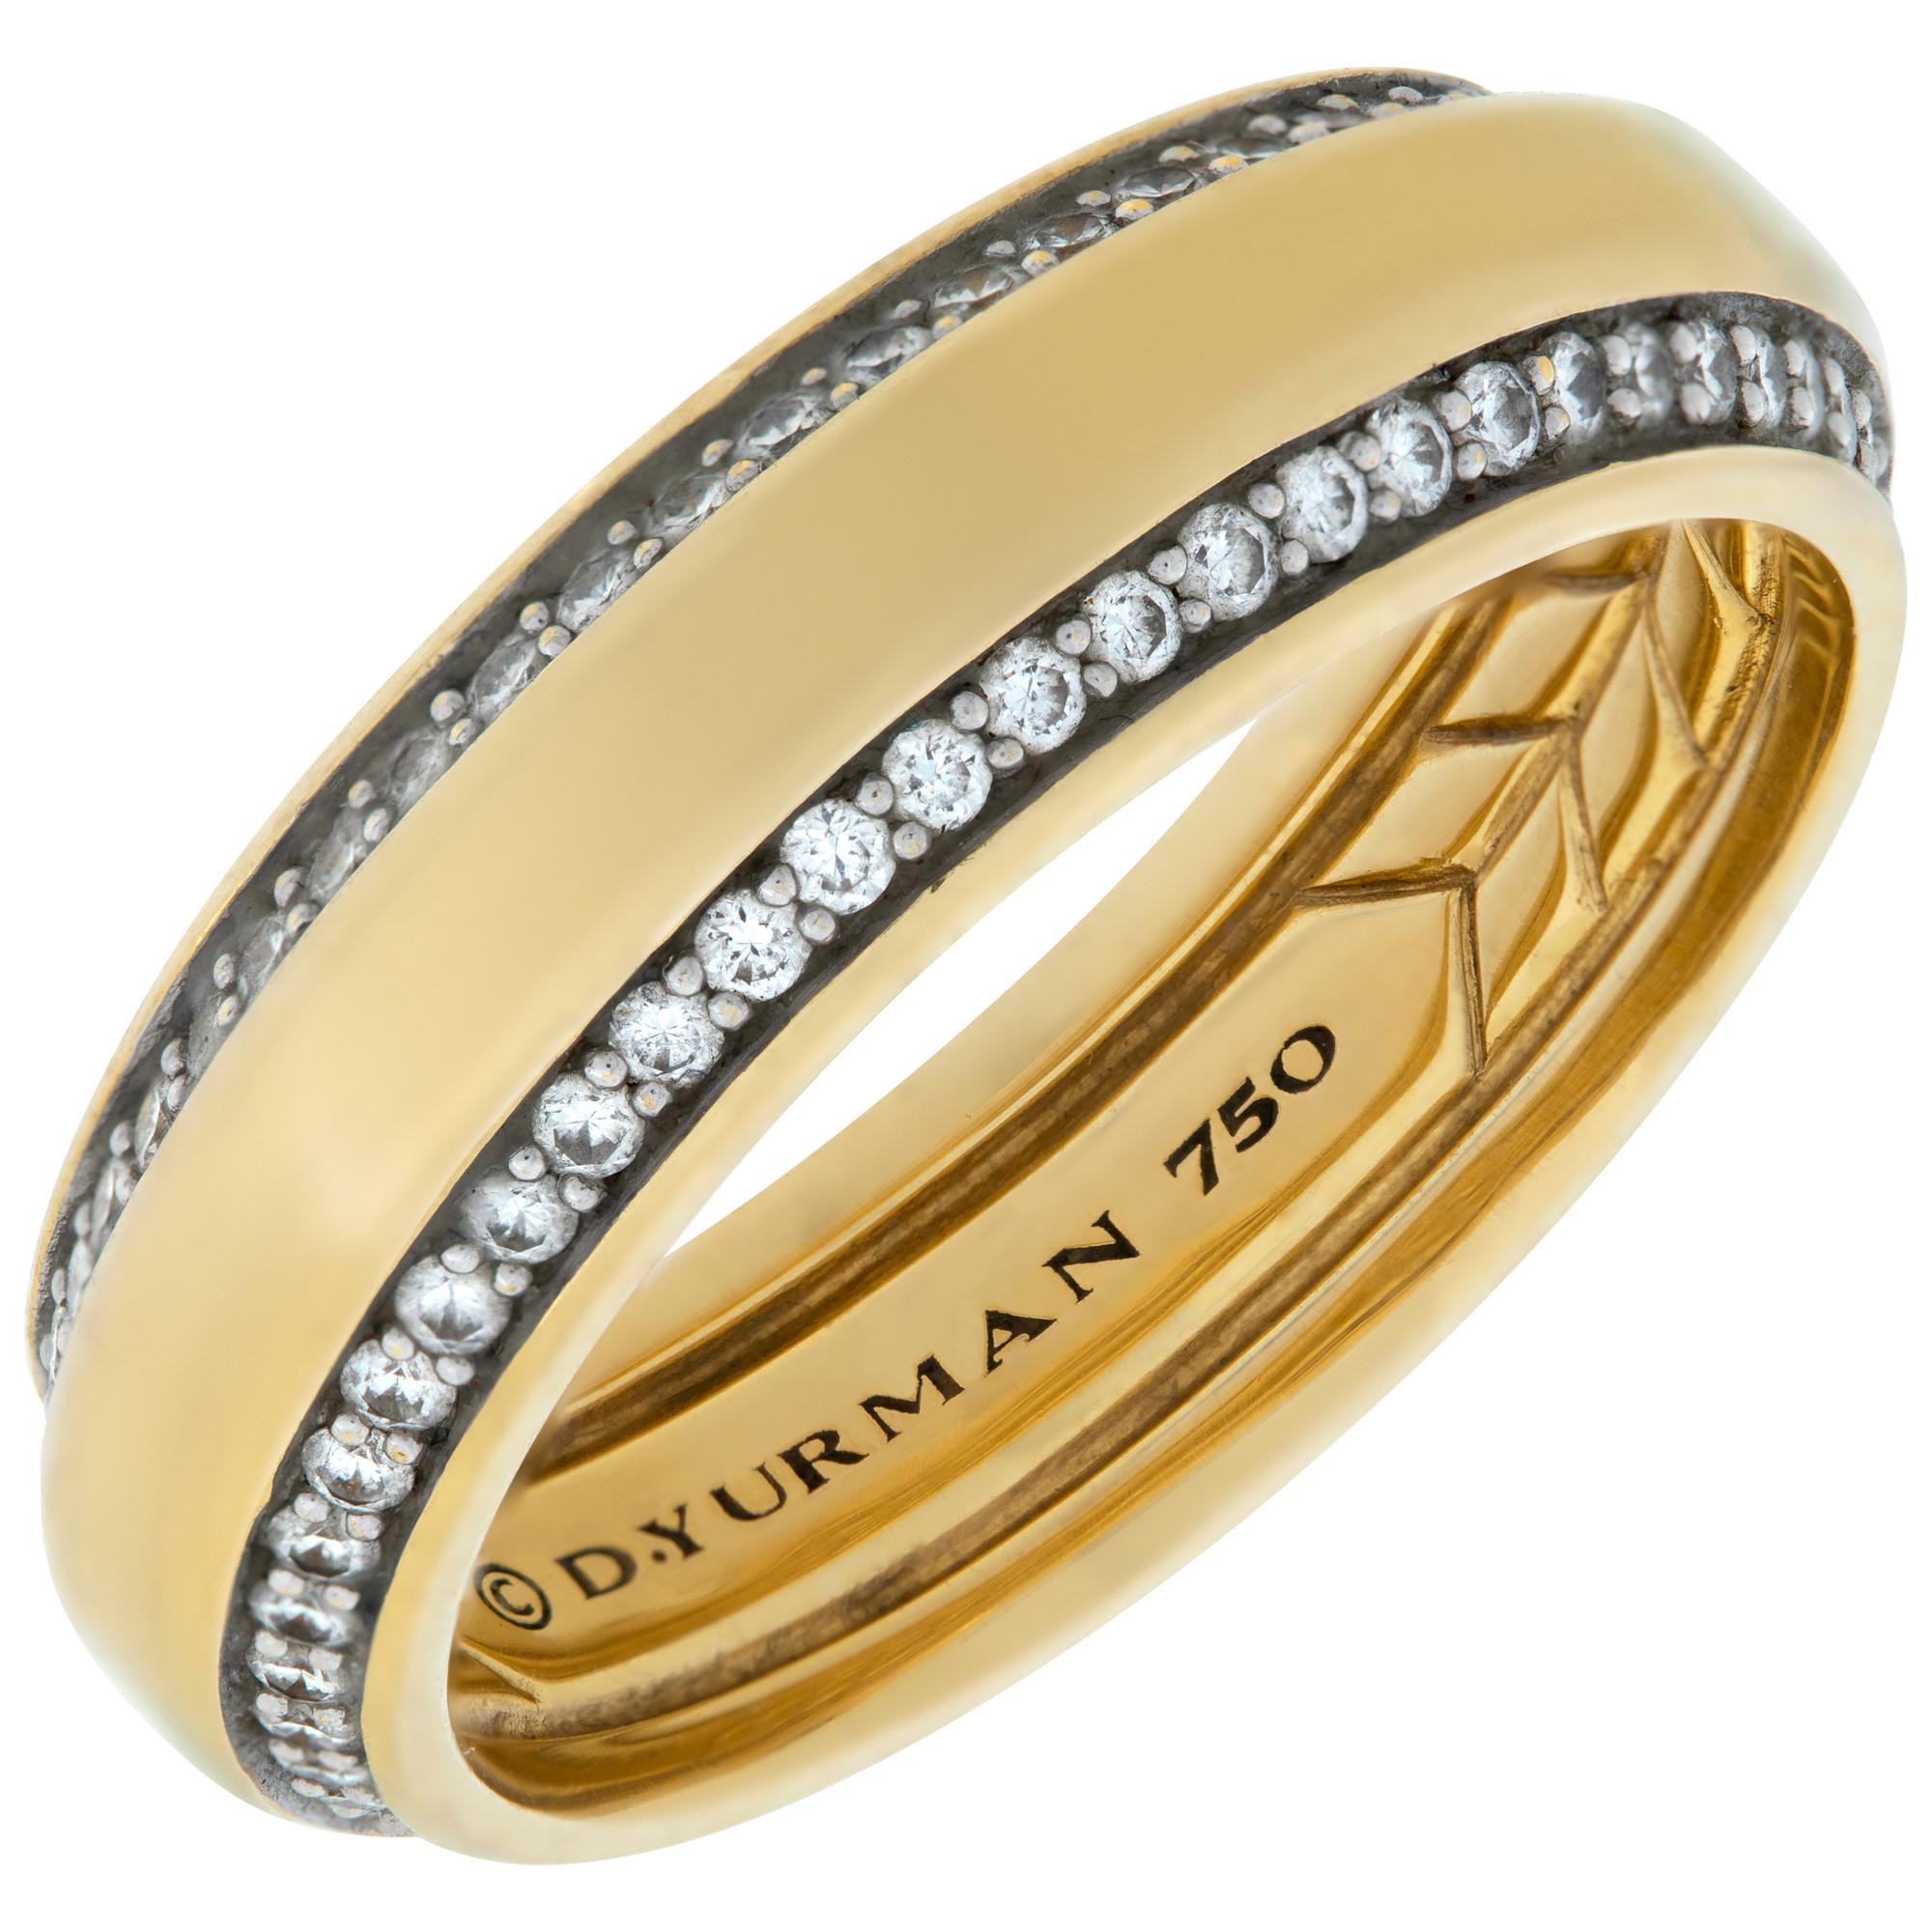 David Yurman diamond 18K yellow & white gold wedding band In Excellent Condition For Sale In Surfside, FL